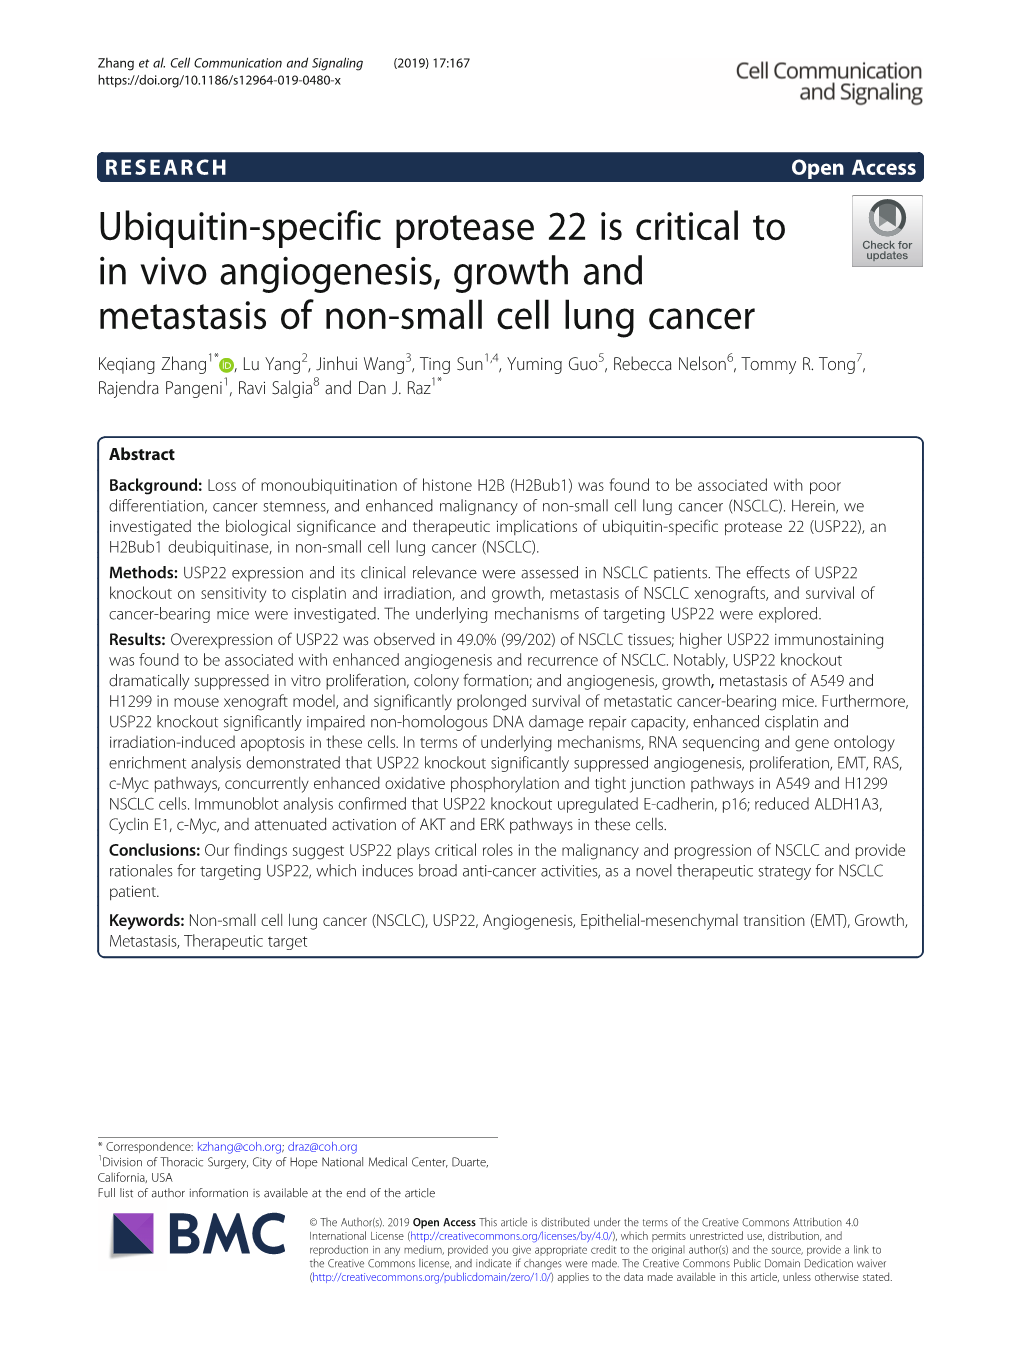 Ubiquitin-Specific Protease 22 Is Critical to in Vivo Angiogenesis